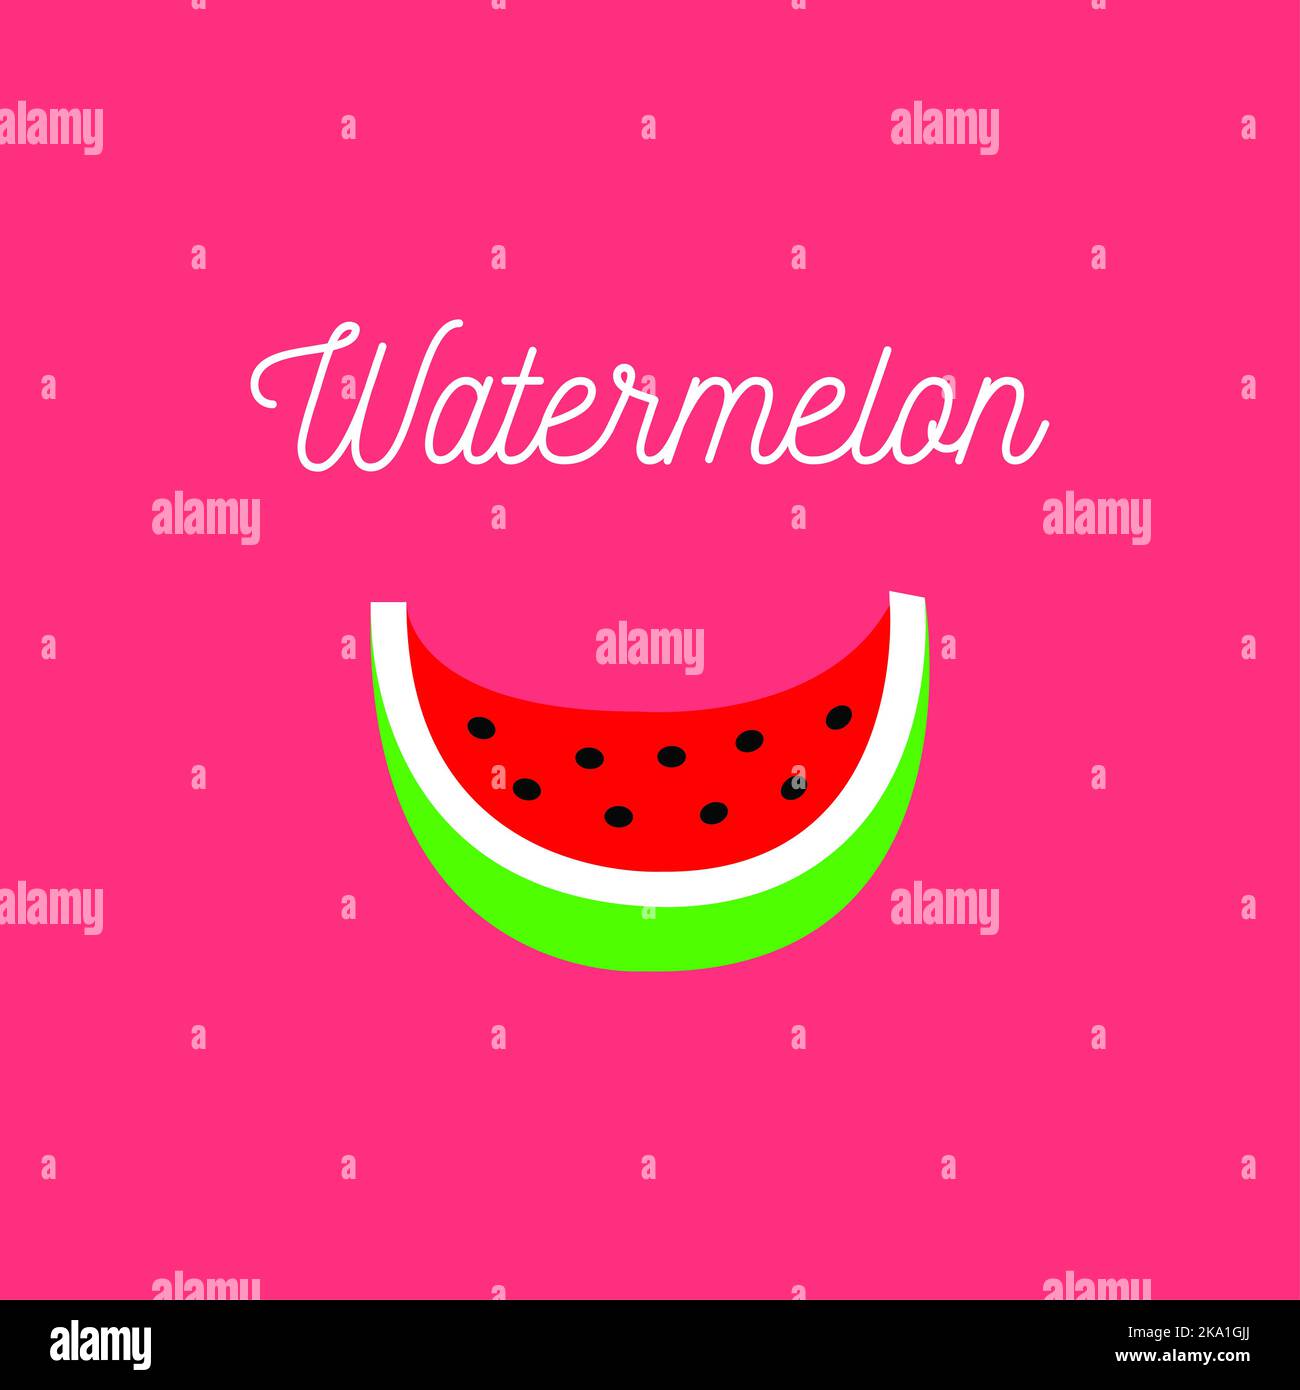 Slice of watermelon on red background. Stock Photo